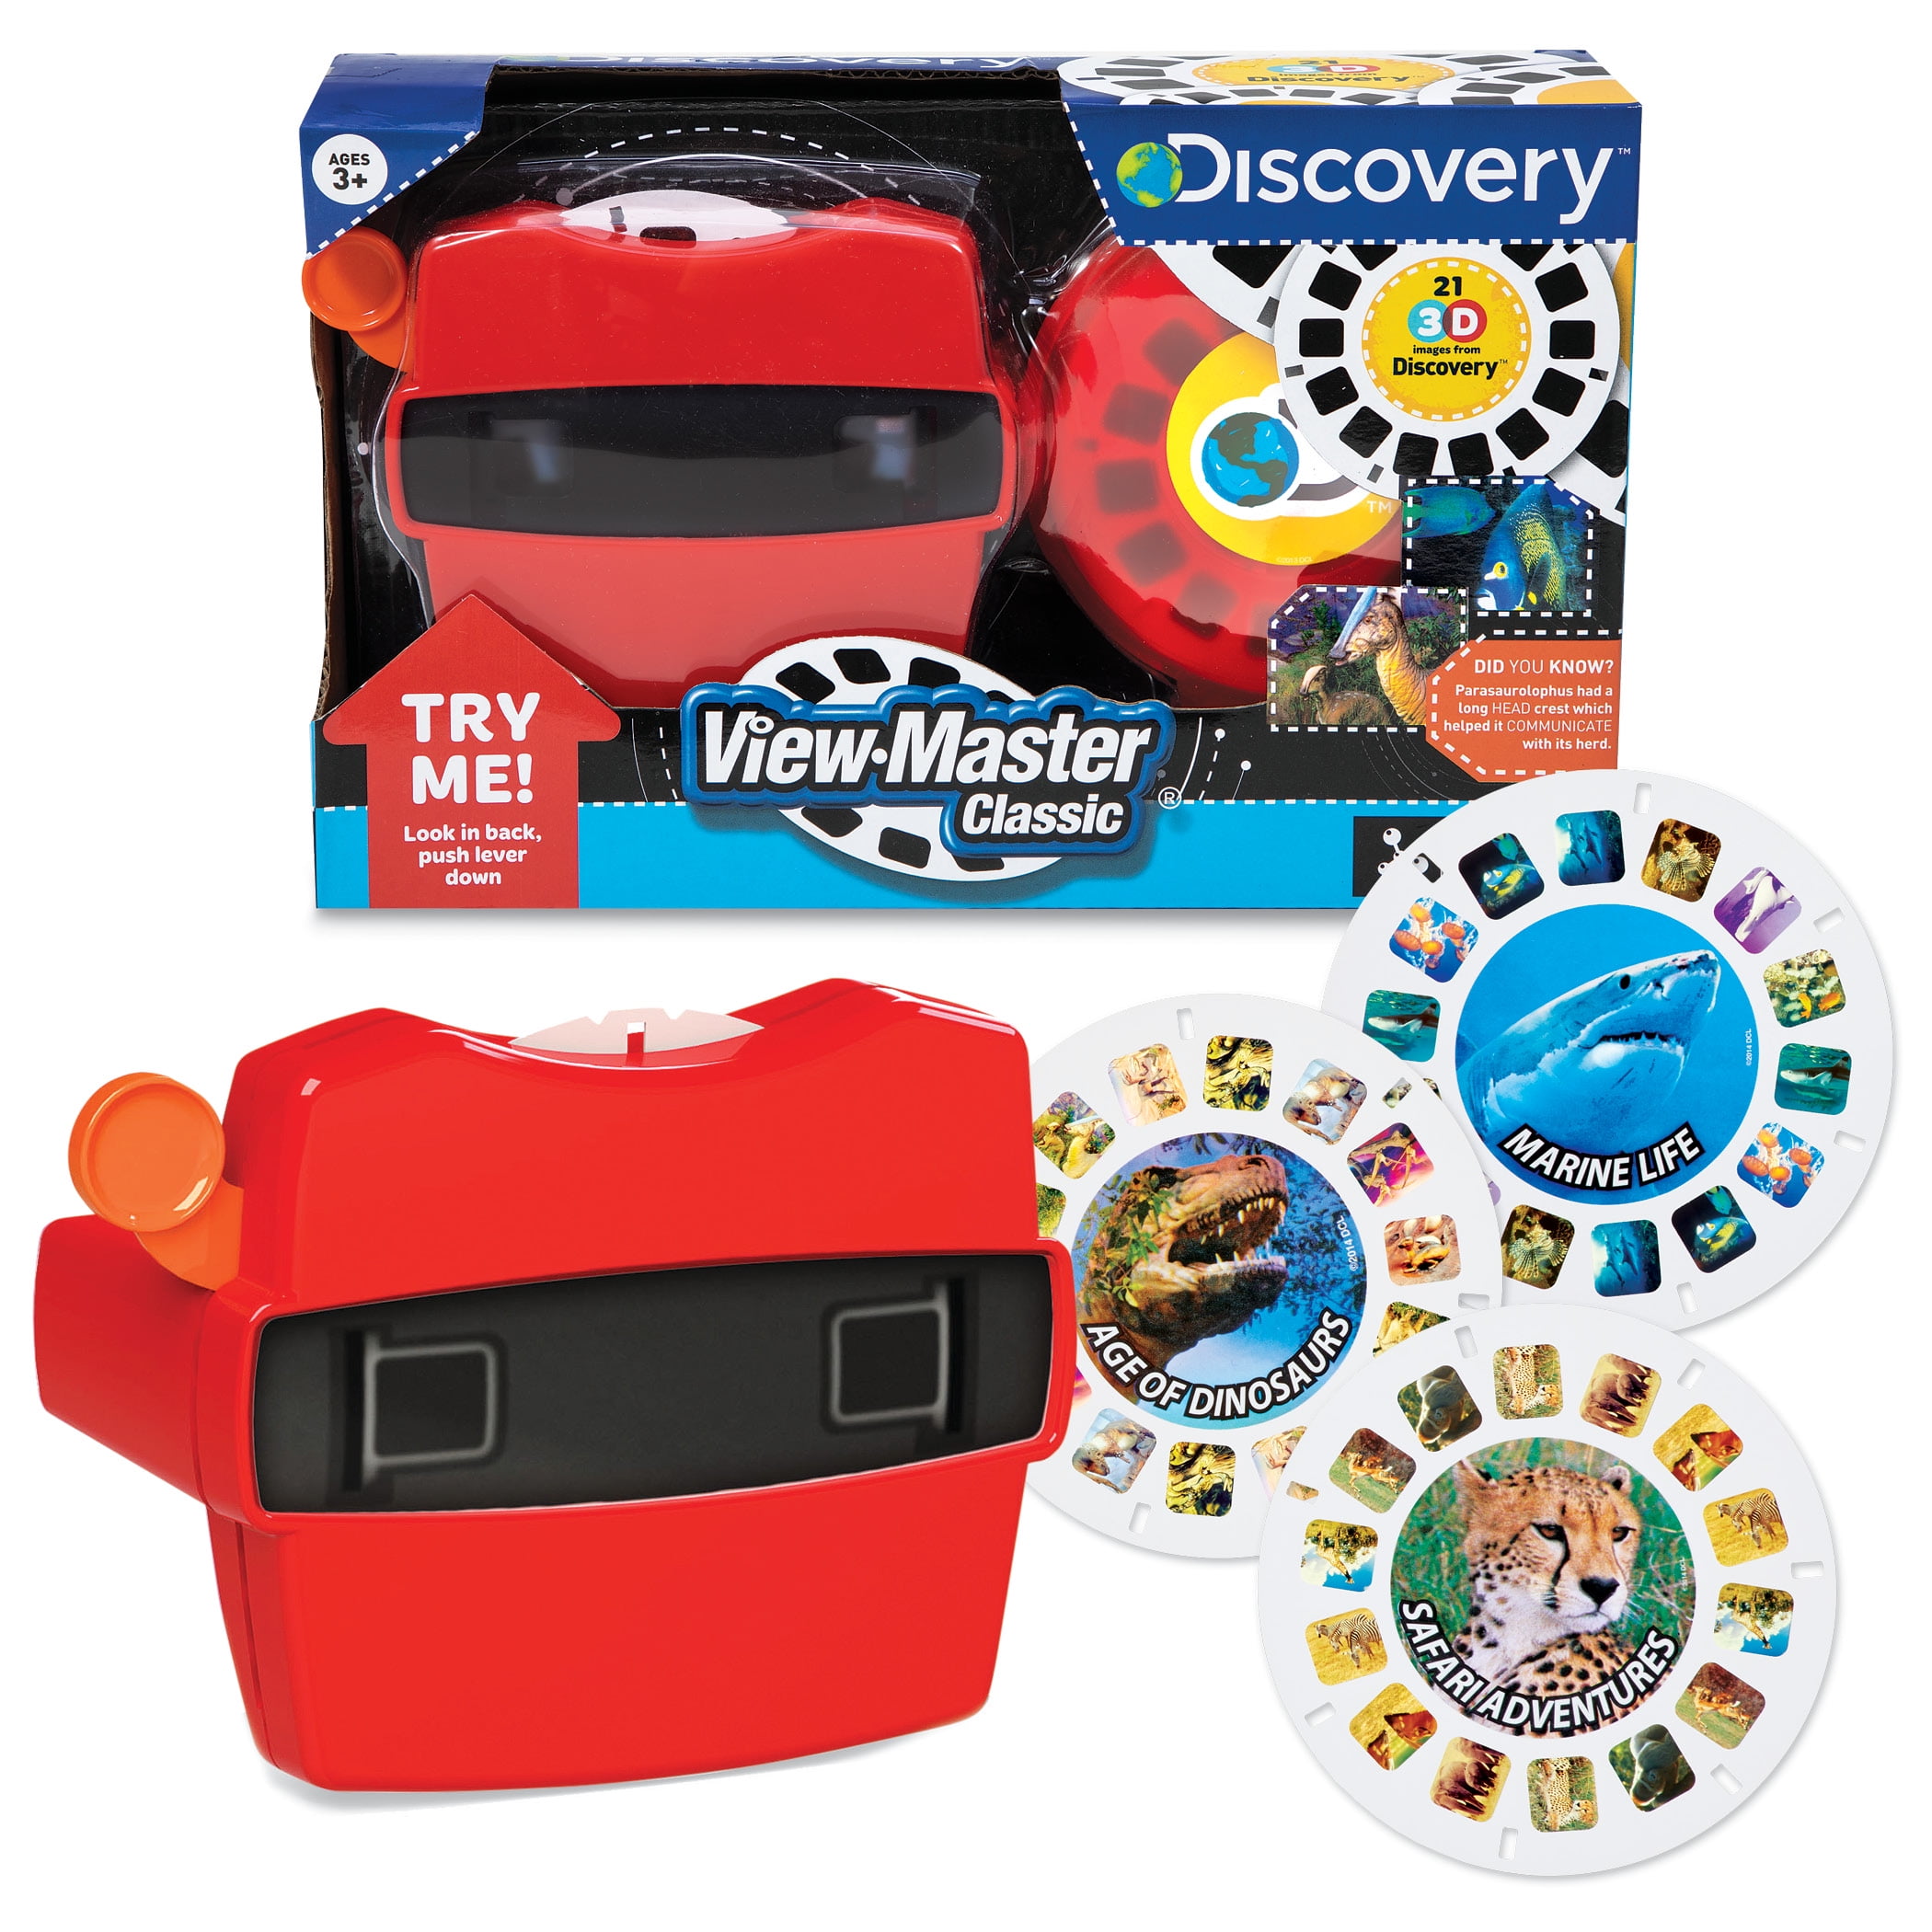 2017 Christmas Toys Ggeology Science Kits View Master Marine Life Gear Apparel Toys